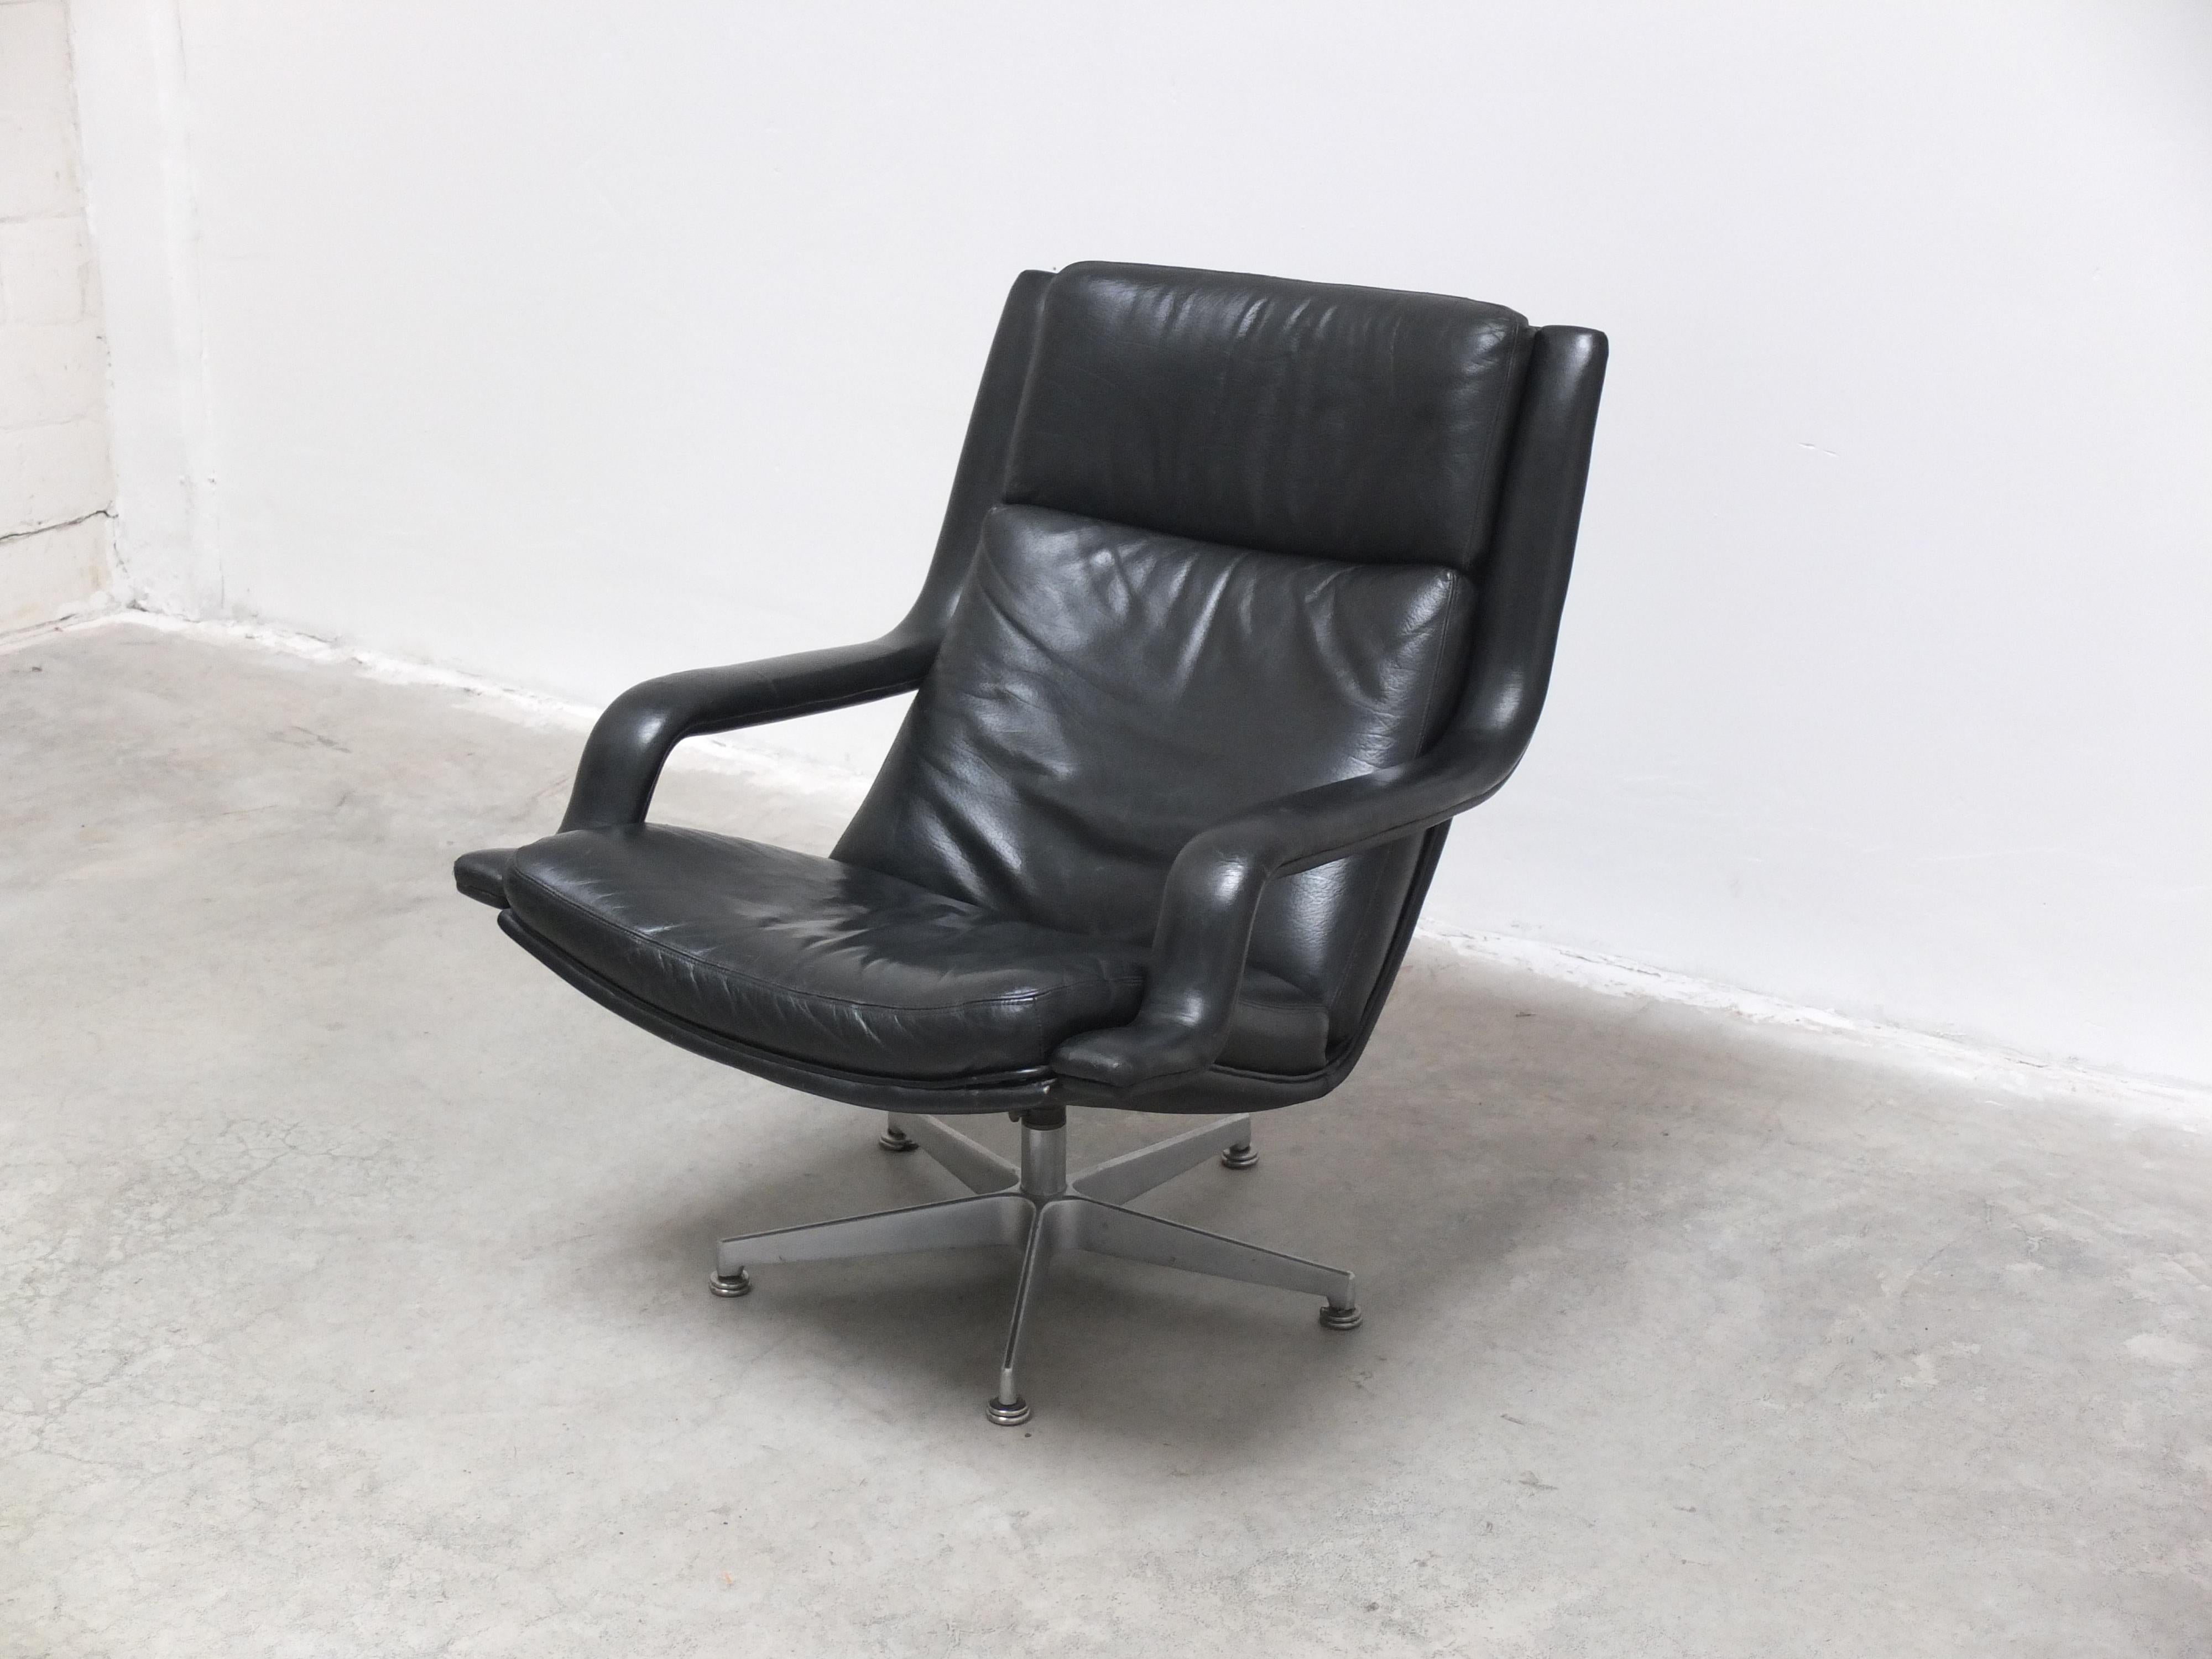 Leather 'F152' Swivel Lounge Chairs by Geoffrey Harcourt for Artifort, 1970s For Sale 8